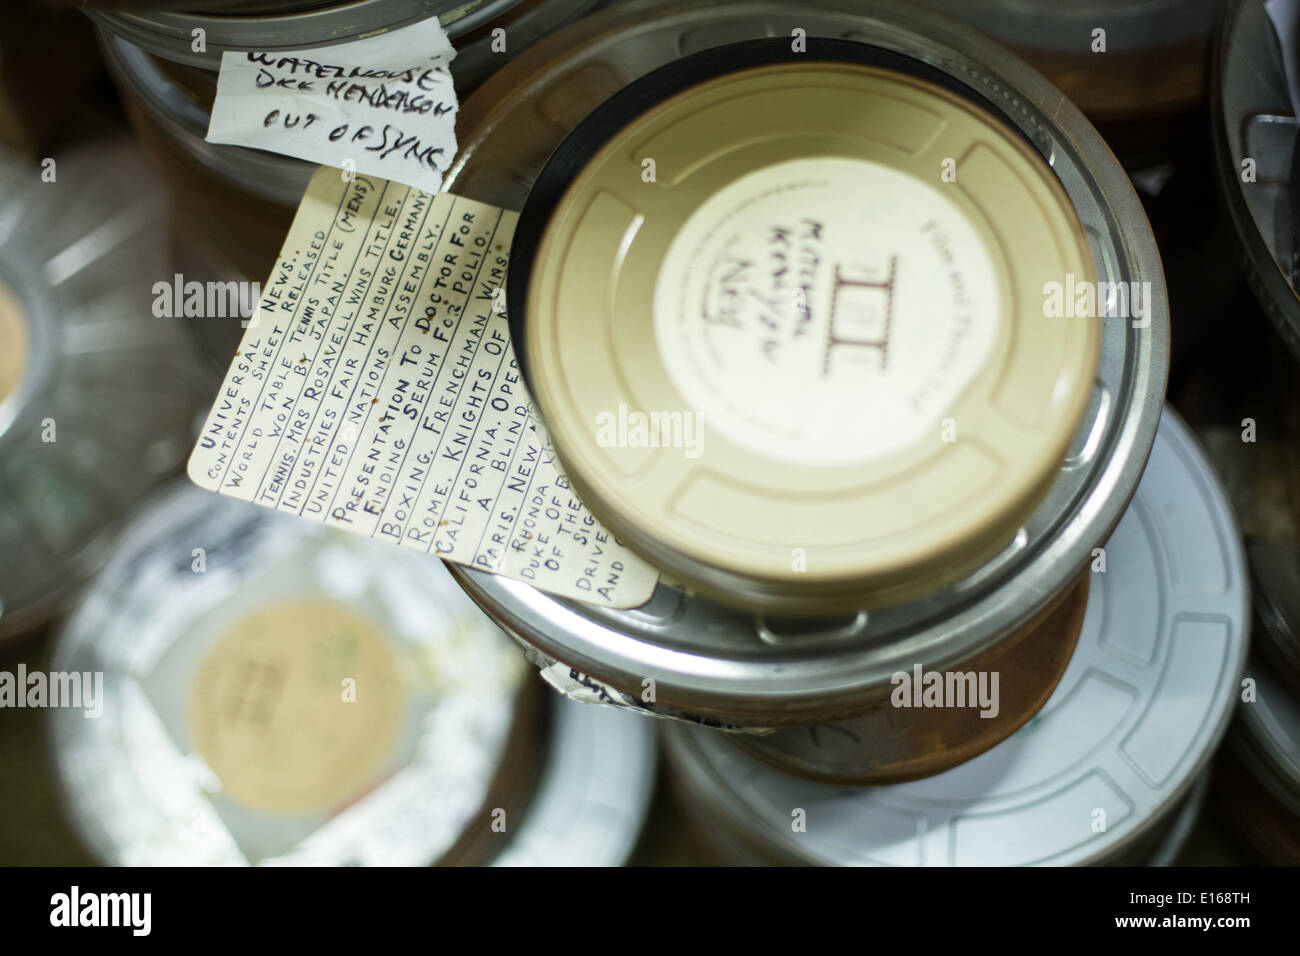 stack of film reels with hand written notes Stock Photo